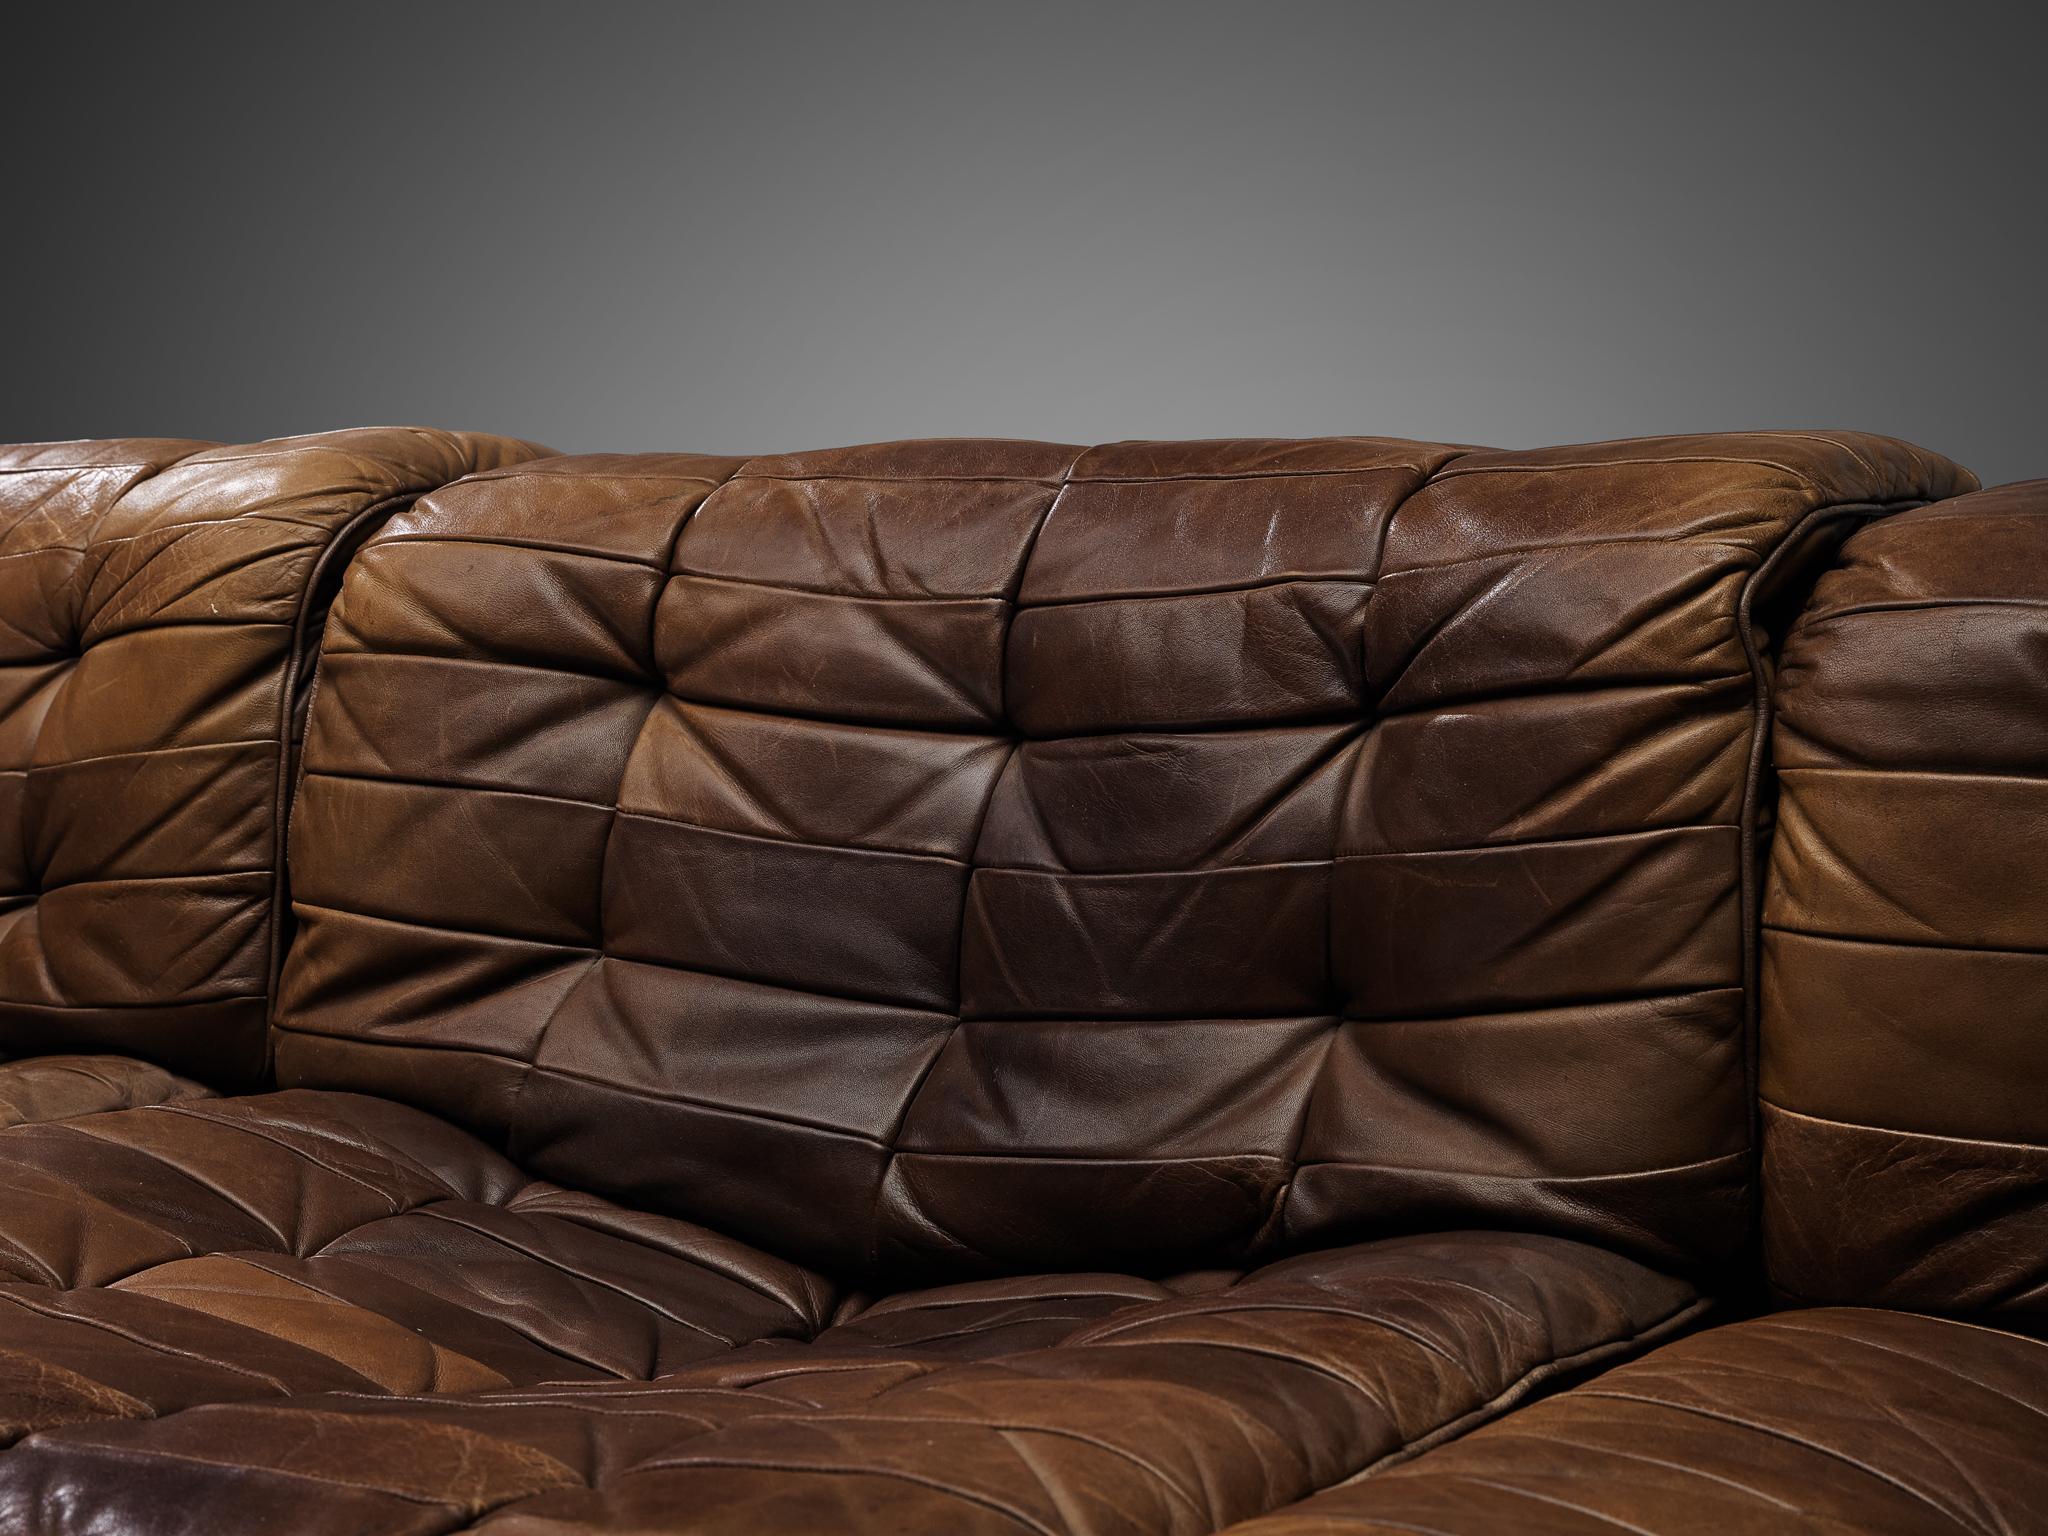 Swiss De Sede Sectional Sofa in Tufted Brown Leather